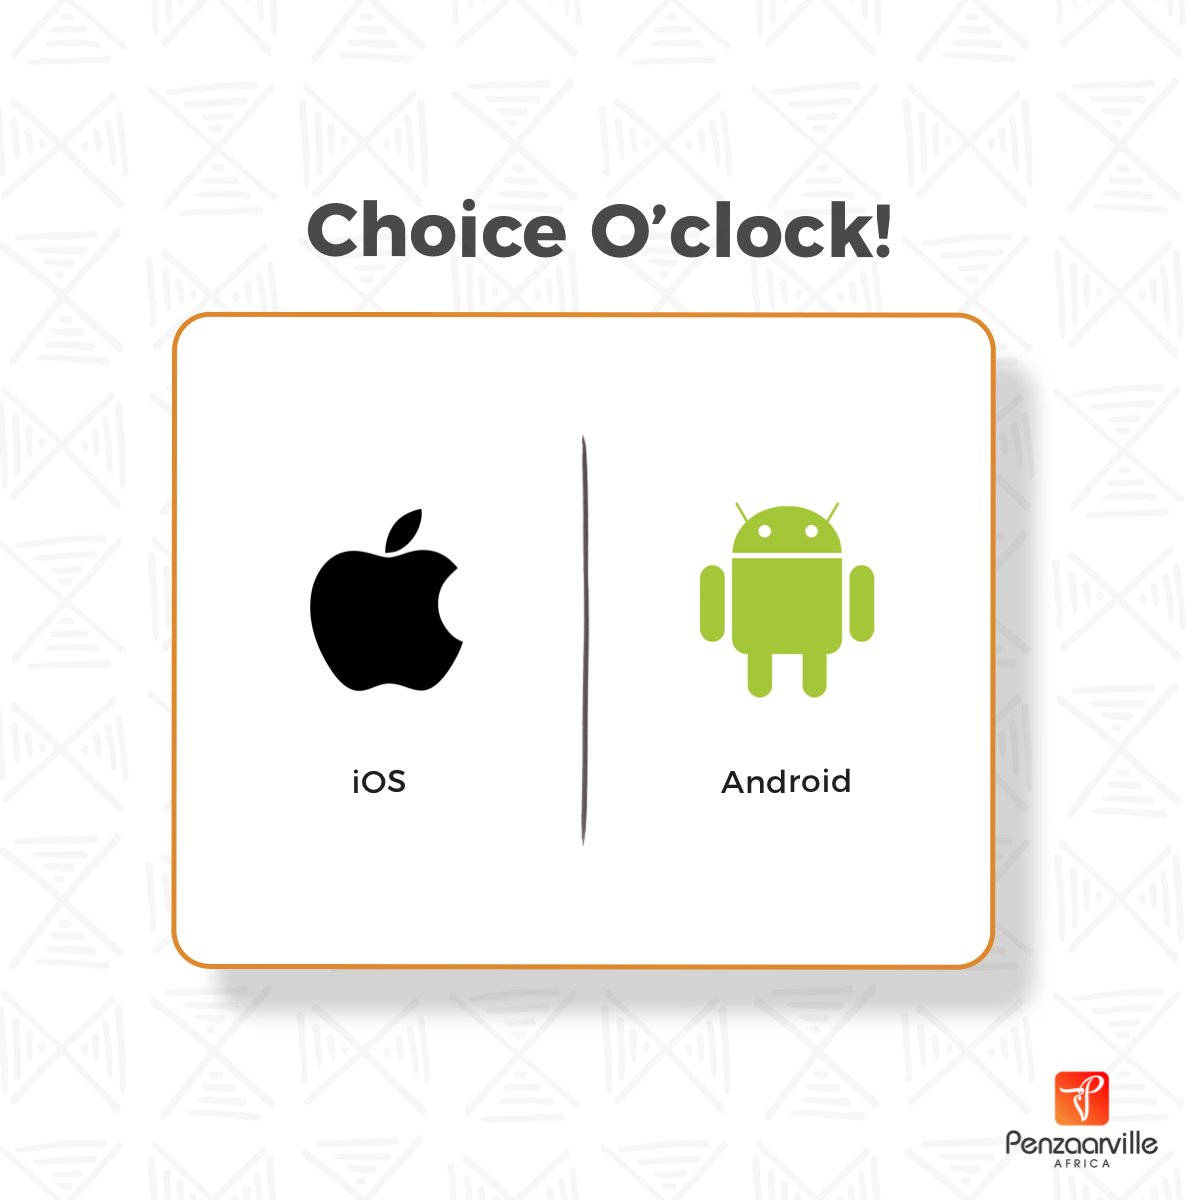 The iPhone vs. Android rivalry is as strong as ever. It's up to you to tell us which you prefer and why? #ChoiceOclock #ThePenzaarvilles #PenzaarvilleAfrica